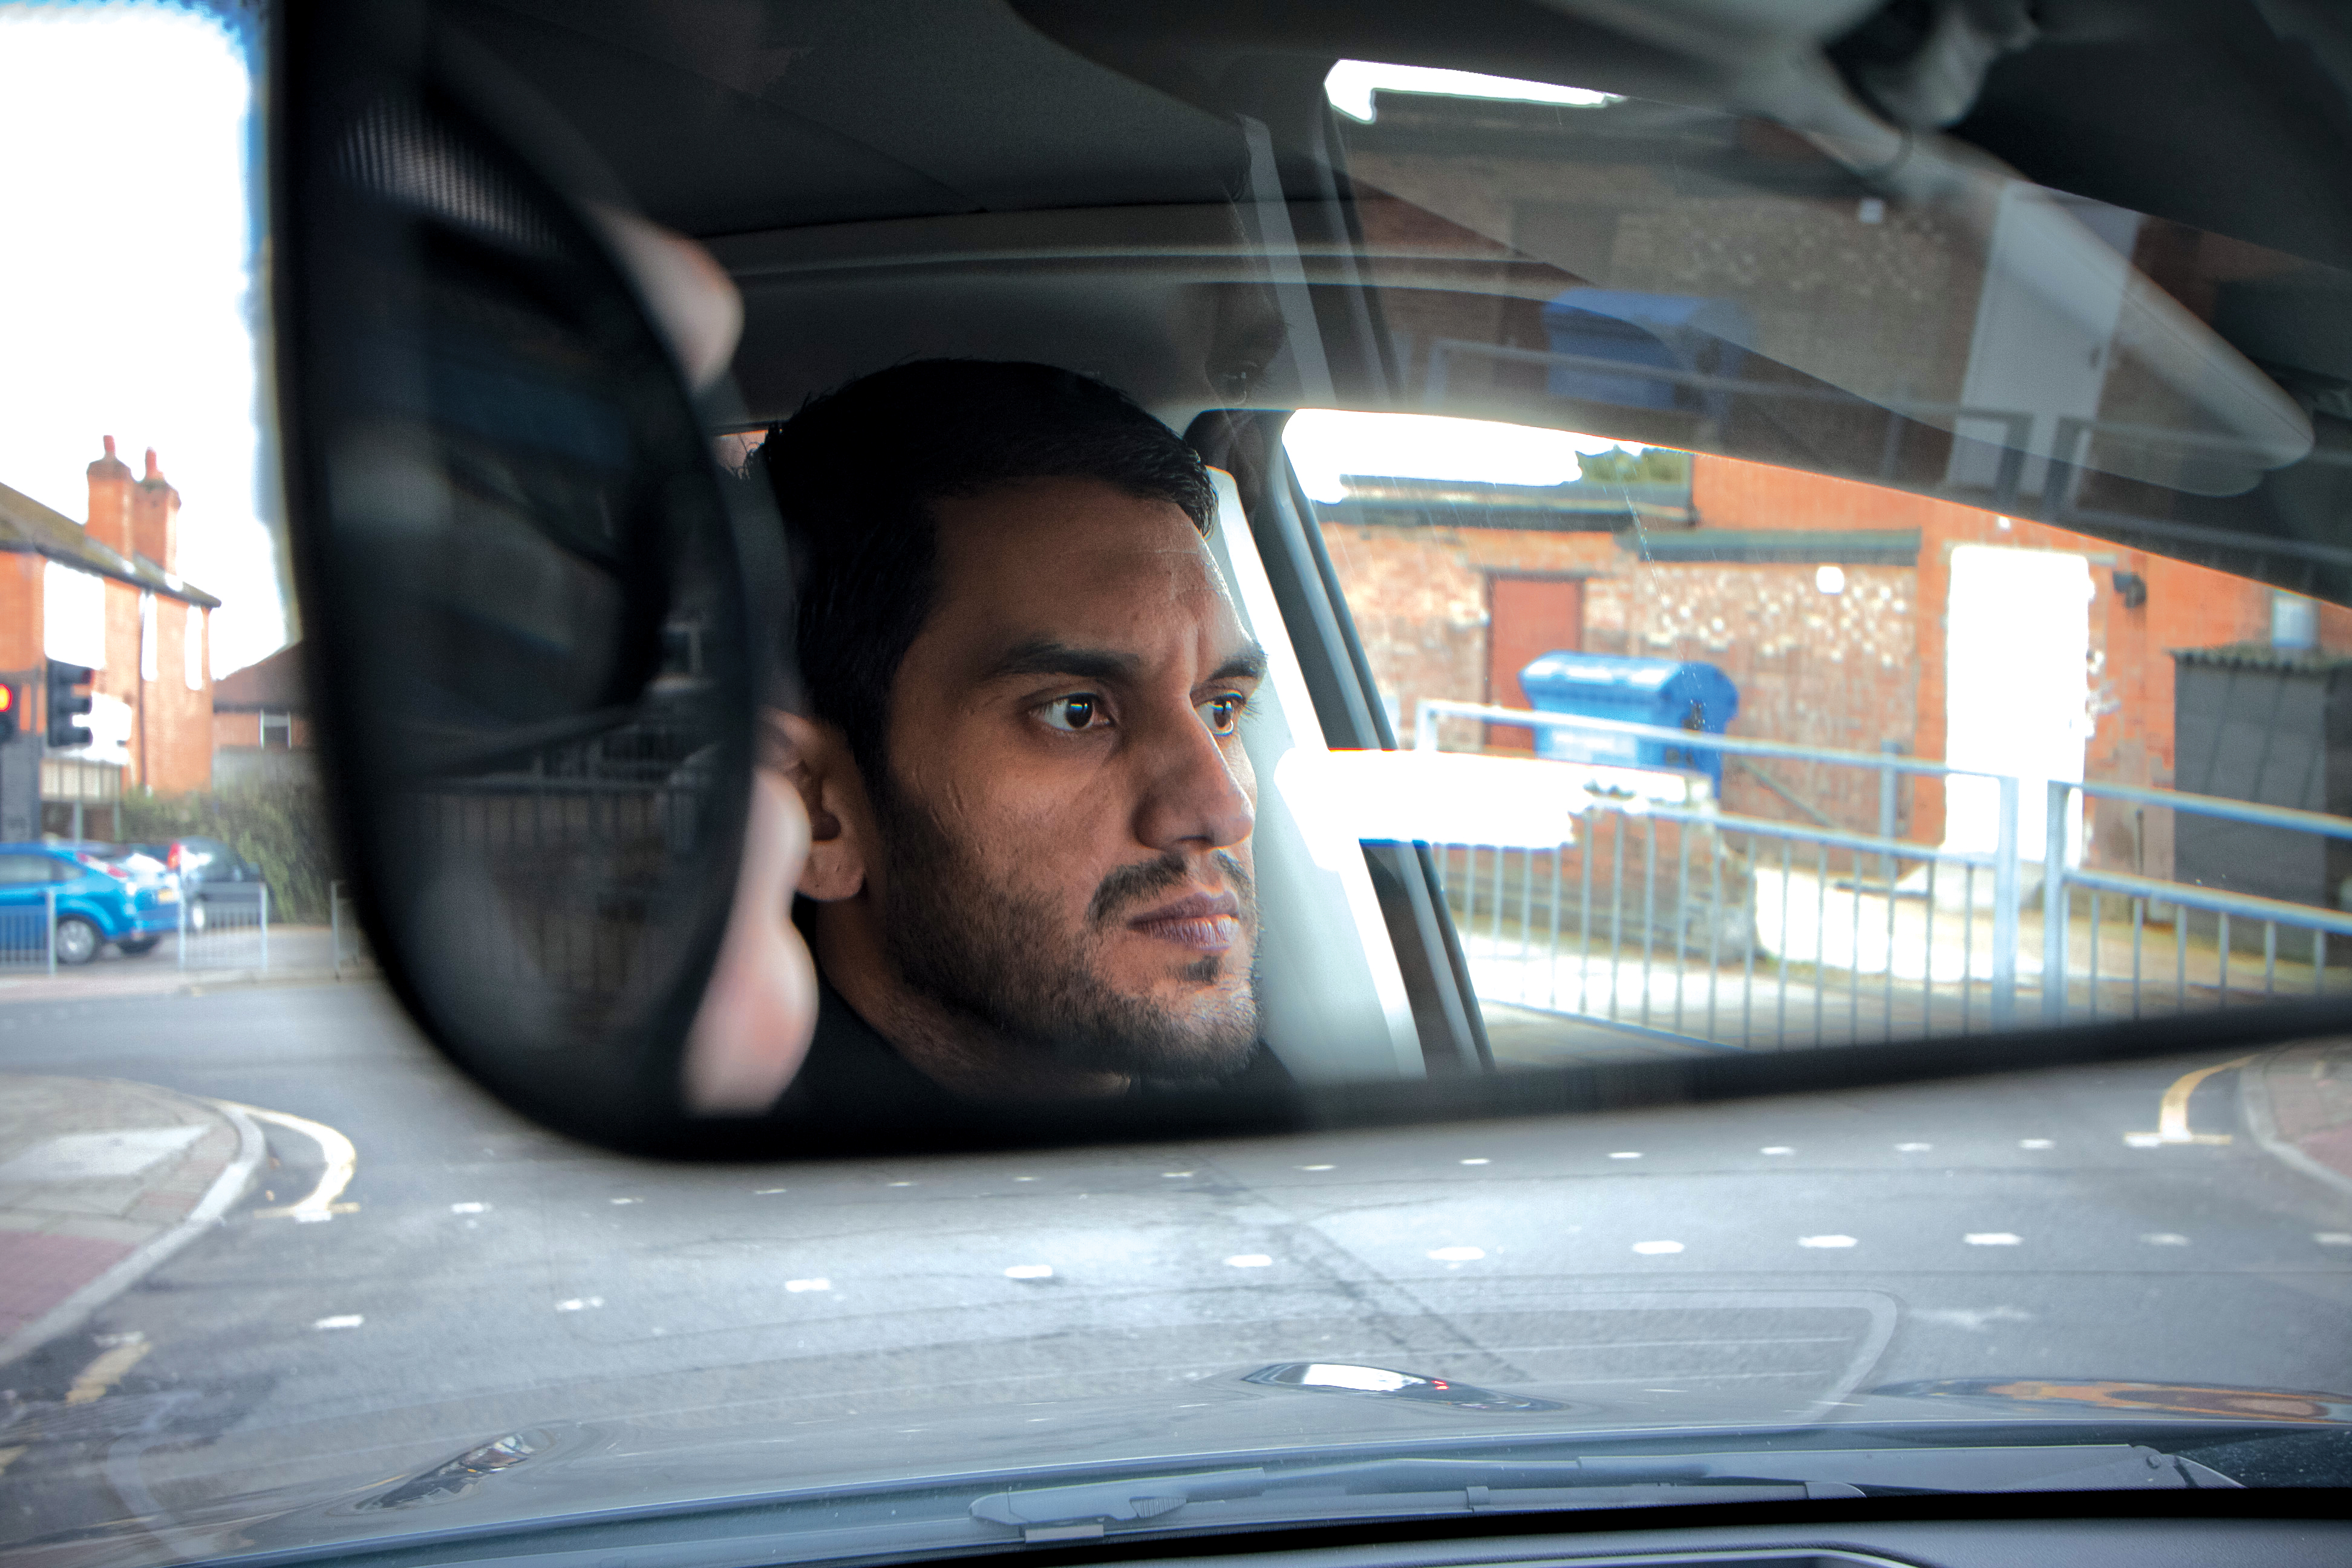 An Encounter Near London’s Southall With a Man’s Troubled Past and His Ambition to Make Movies